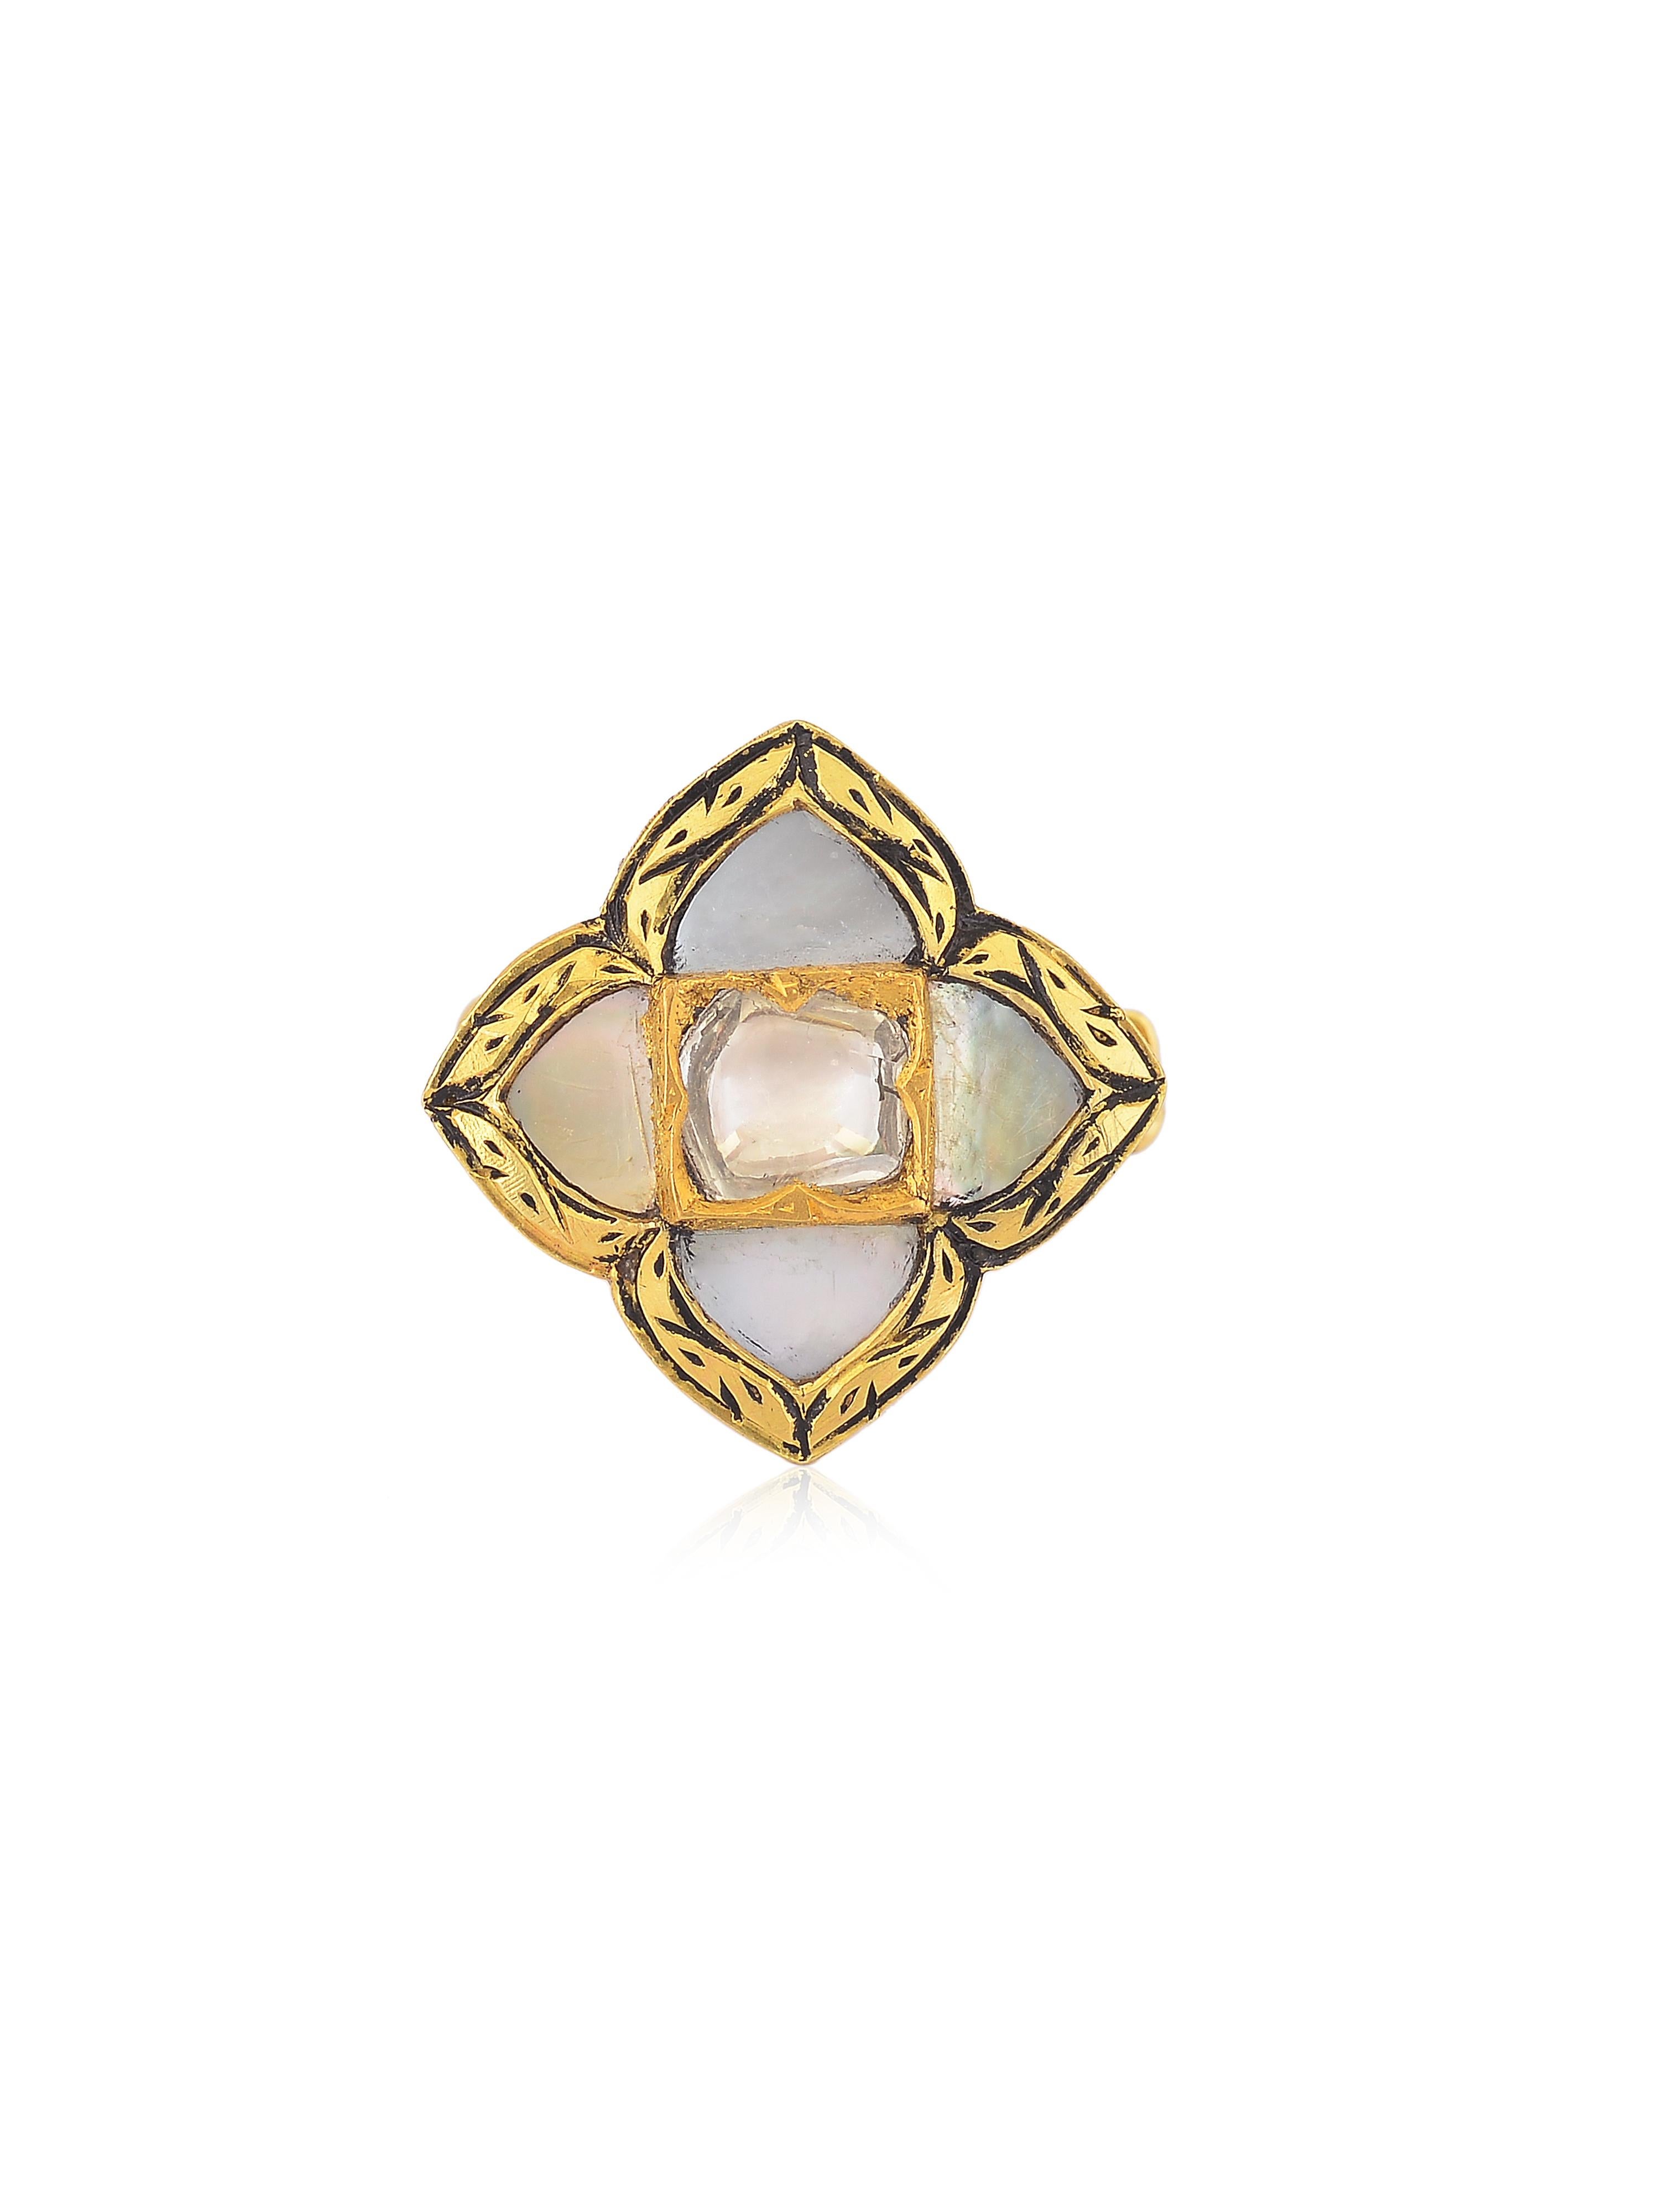 A statement ring with Mother of Pearl and a shiny uncut diamond in the centre. You will notice black enamel work all around the border of the ring, this work is called 